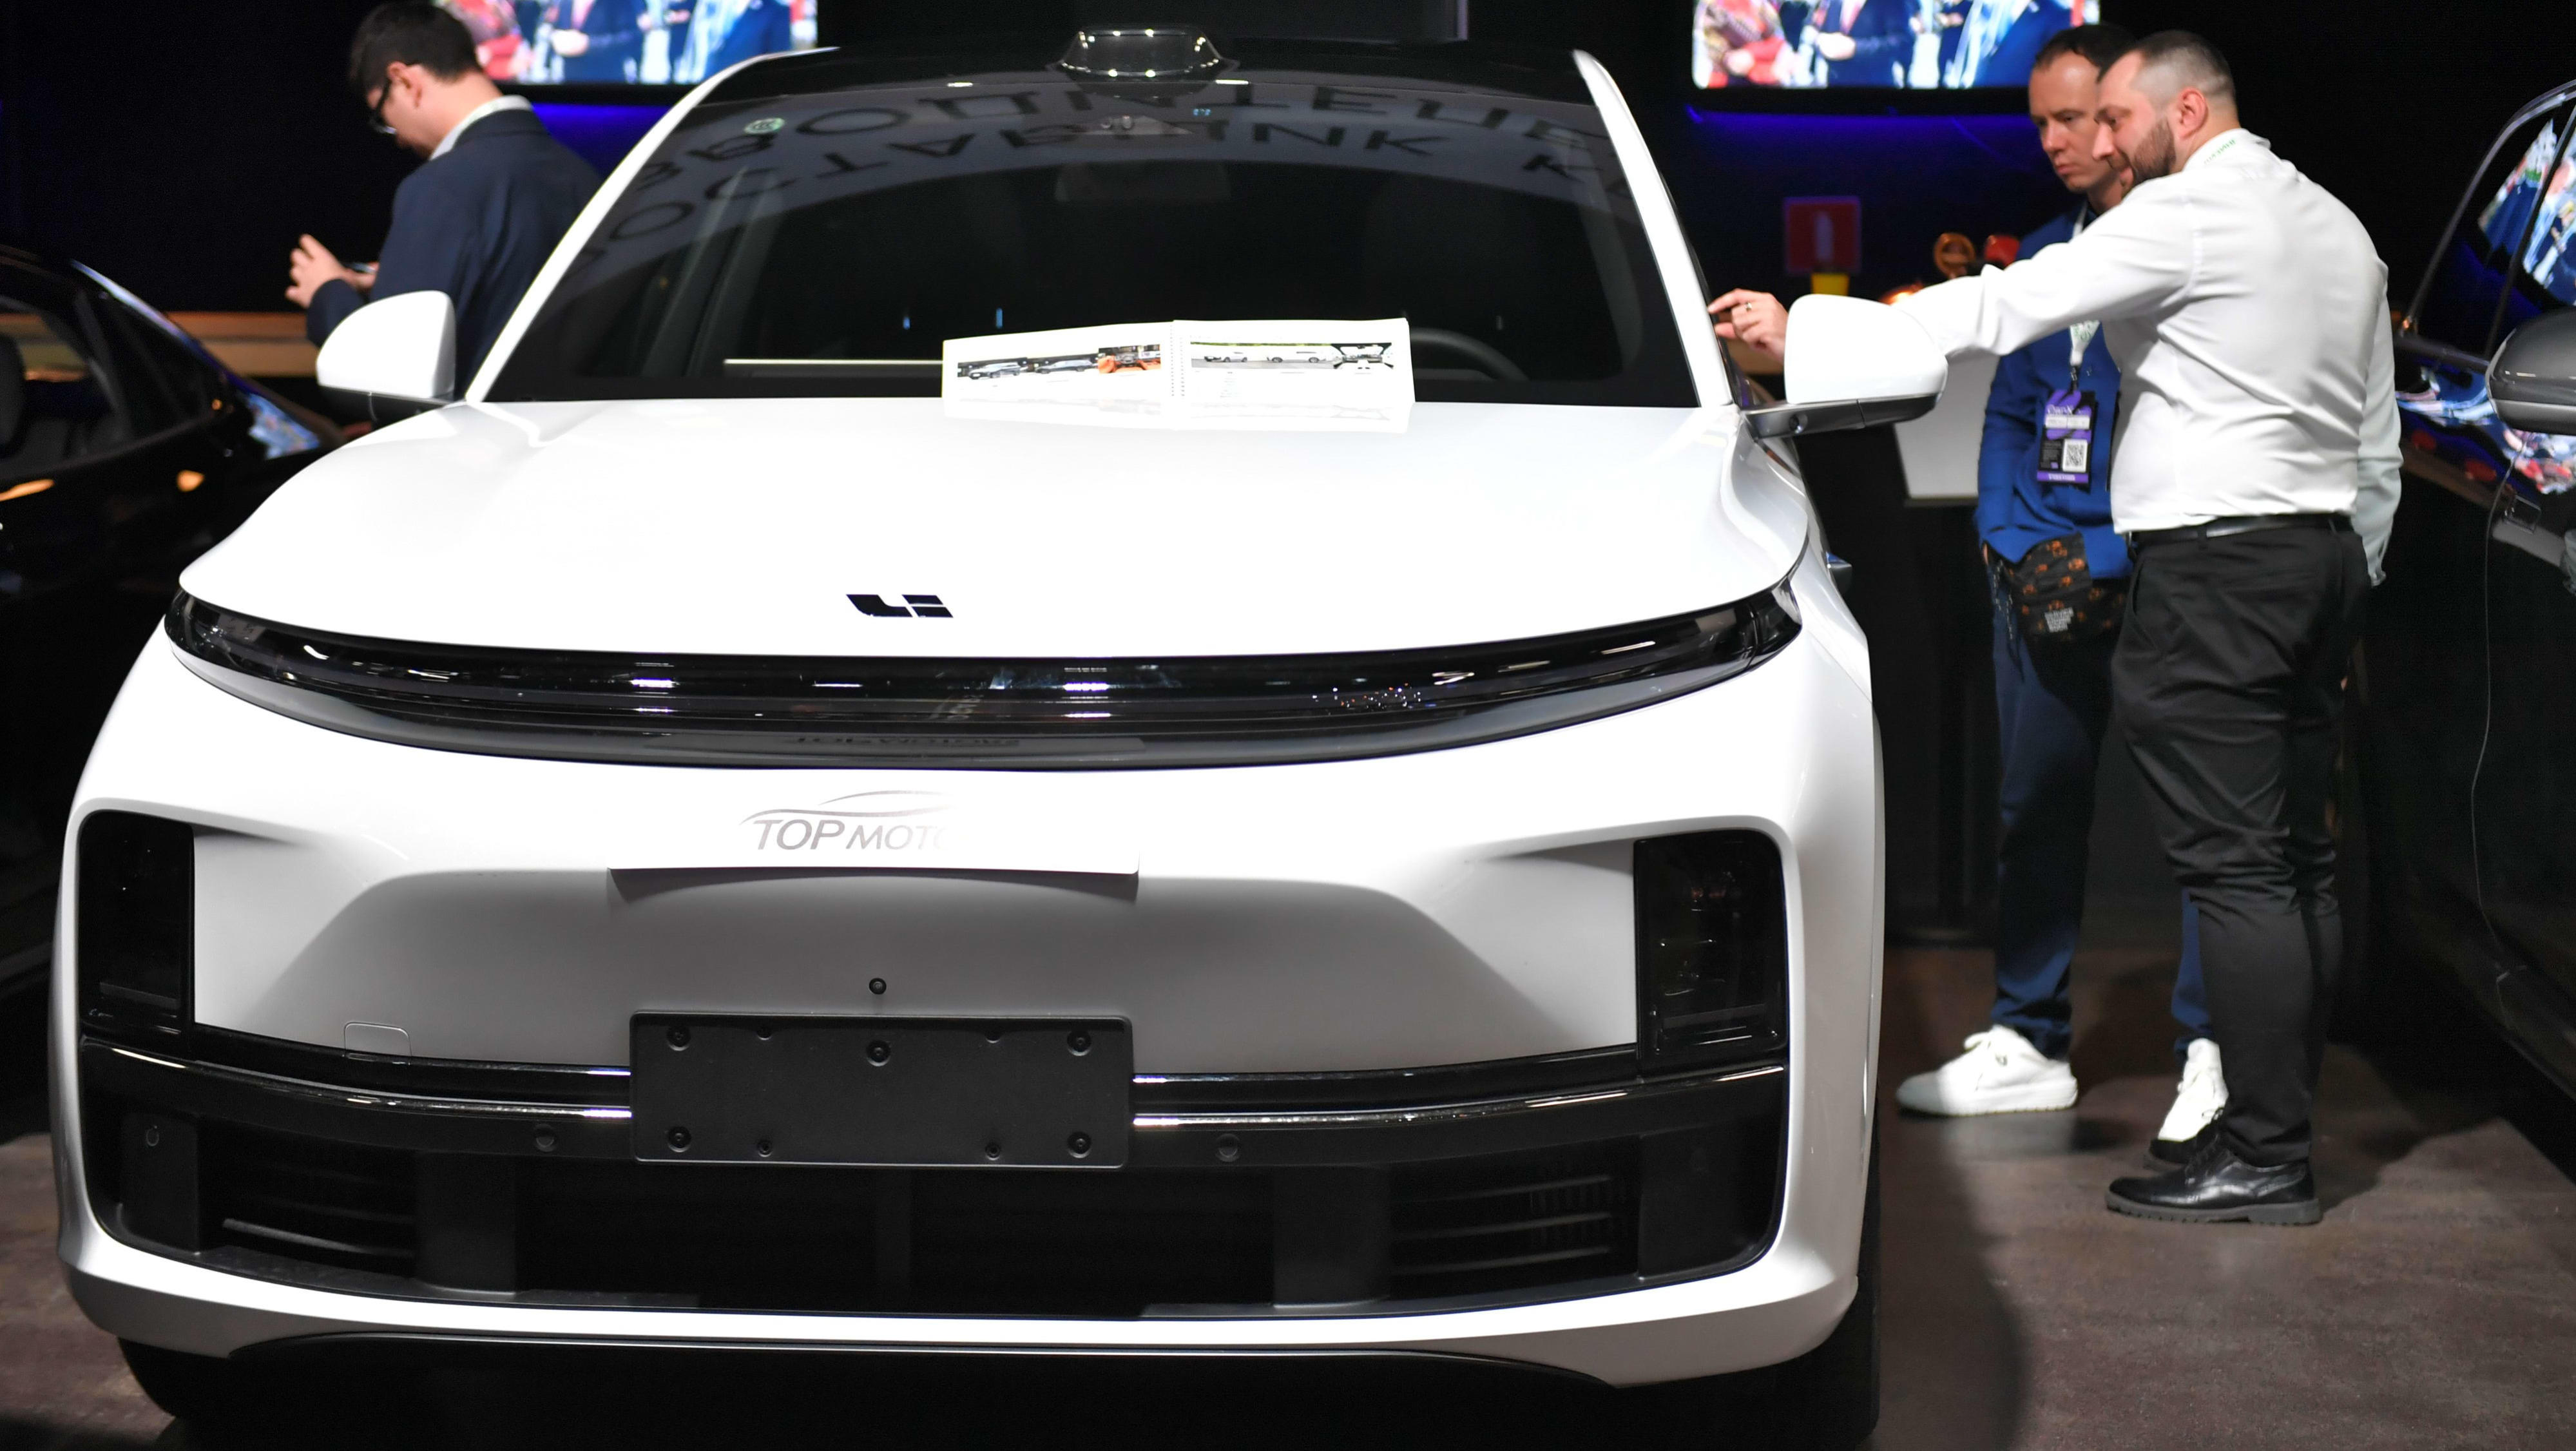 China's Li Auto to start mass production of its first full EV in